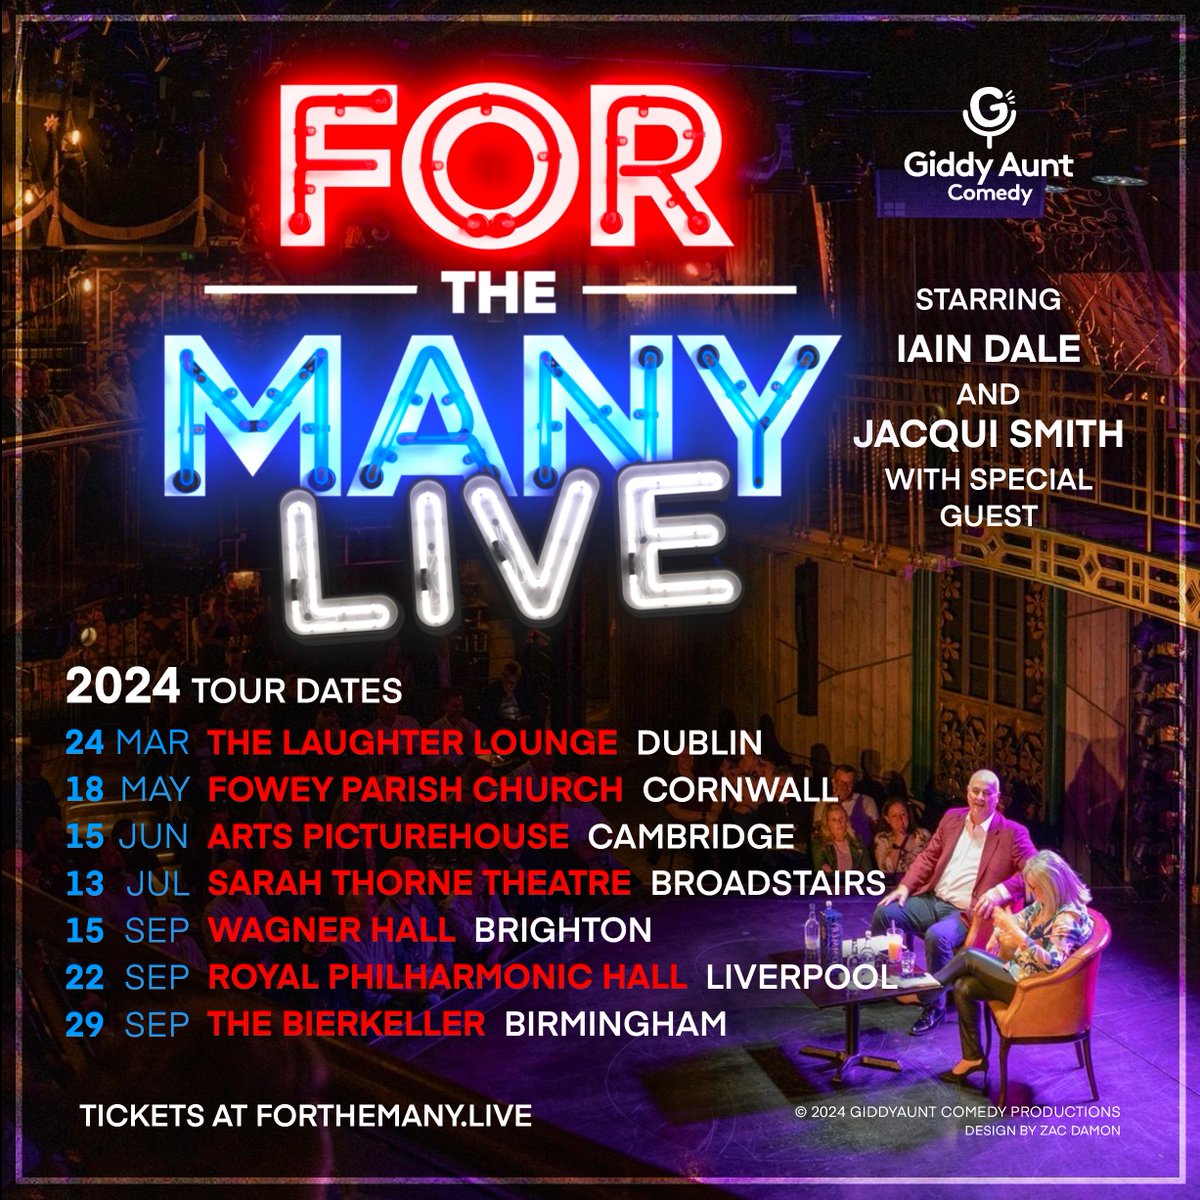 Tickets for FOR THE MANY LIVE! in Fowey, Cambridge Brighton and Liverpool are now on sale at forthemany.live